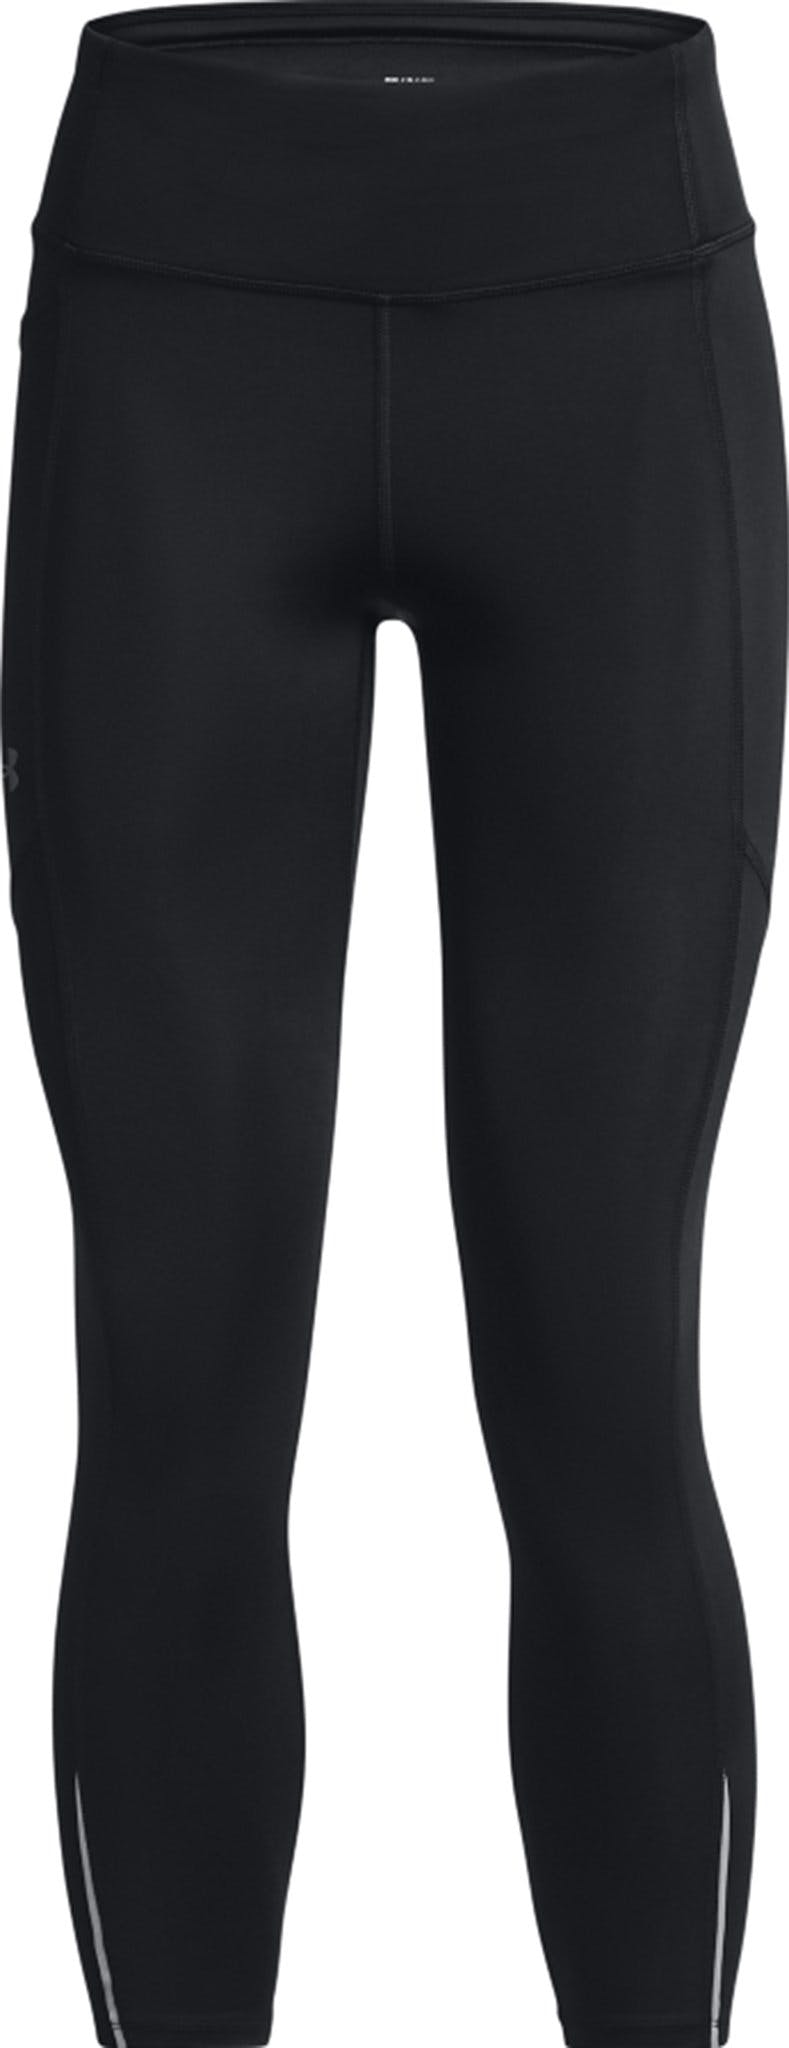 Product image for Fly Fast 3.0 Ankle Tights - Women's